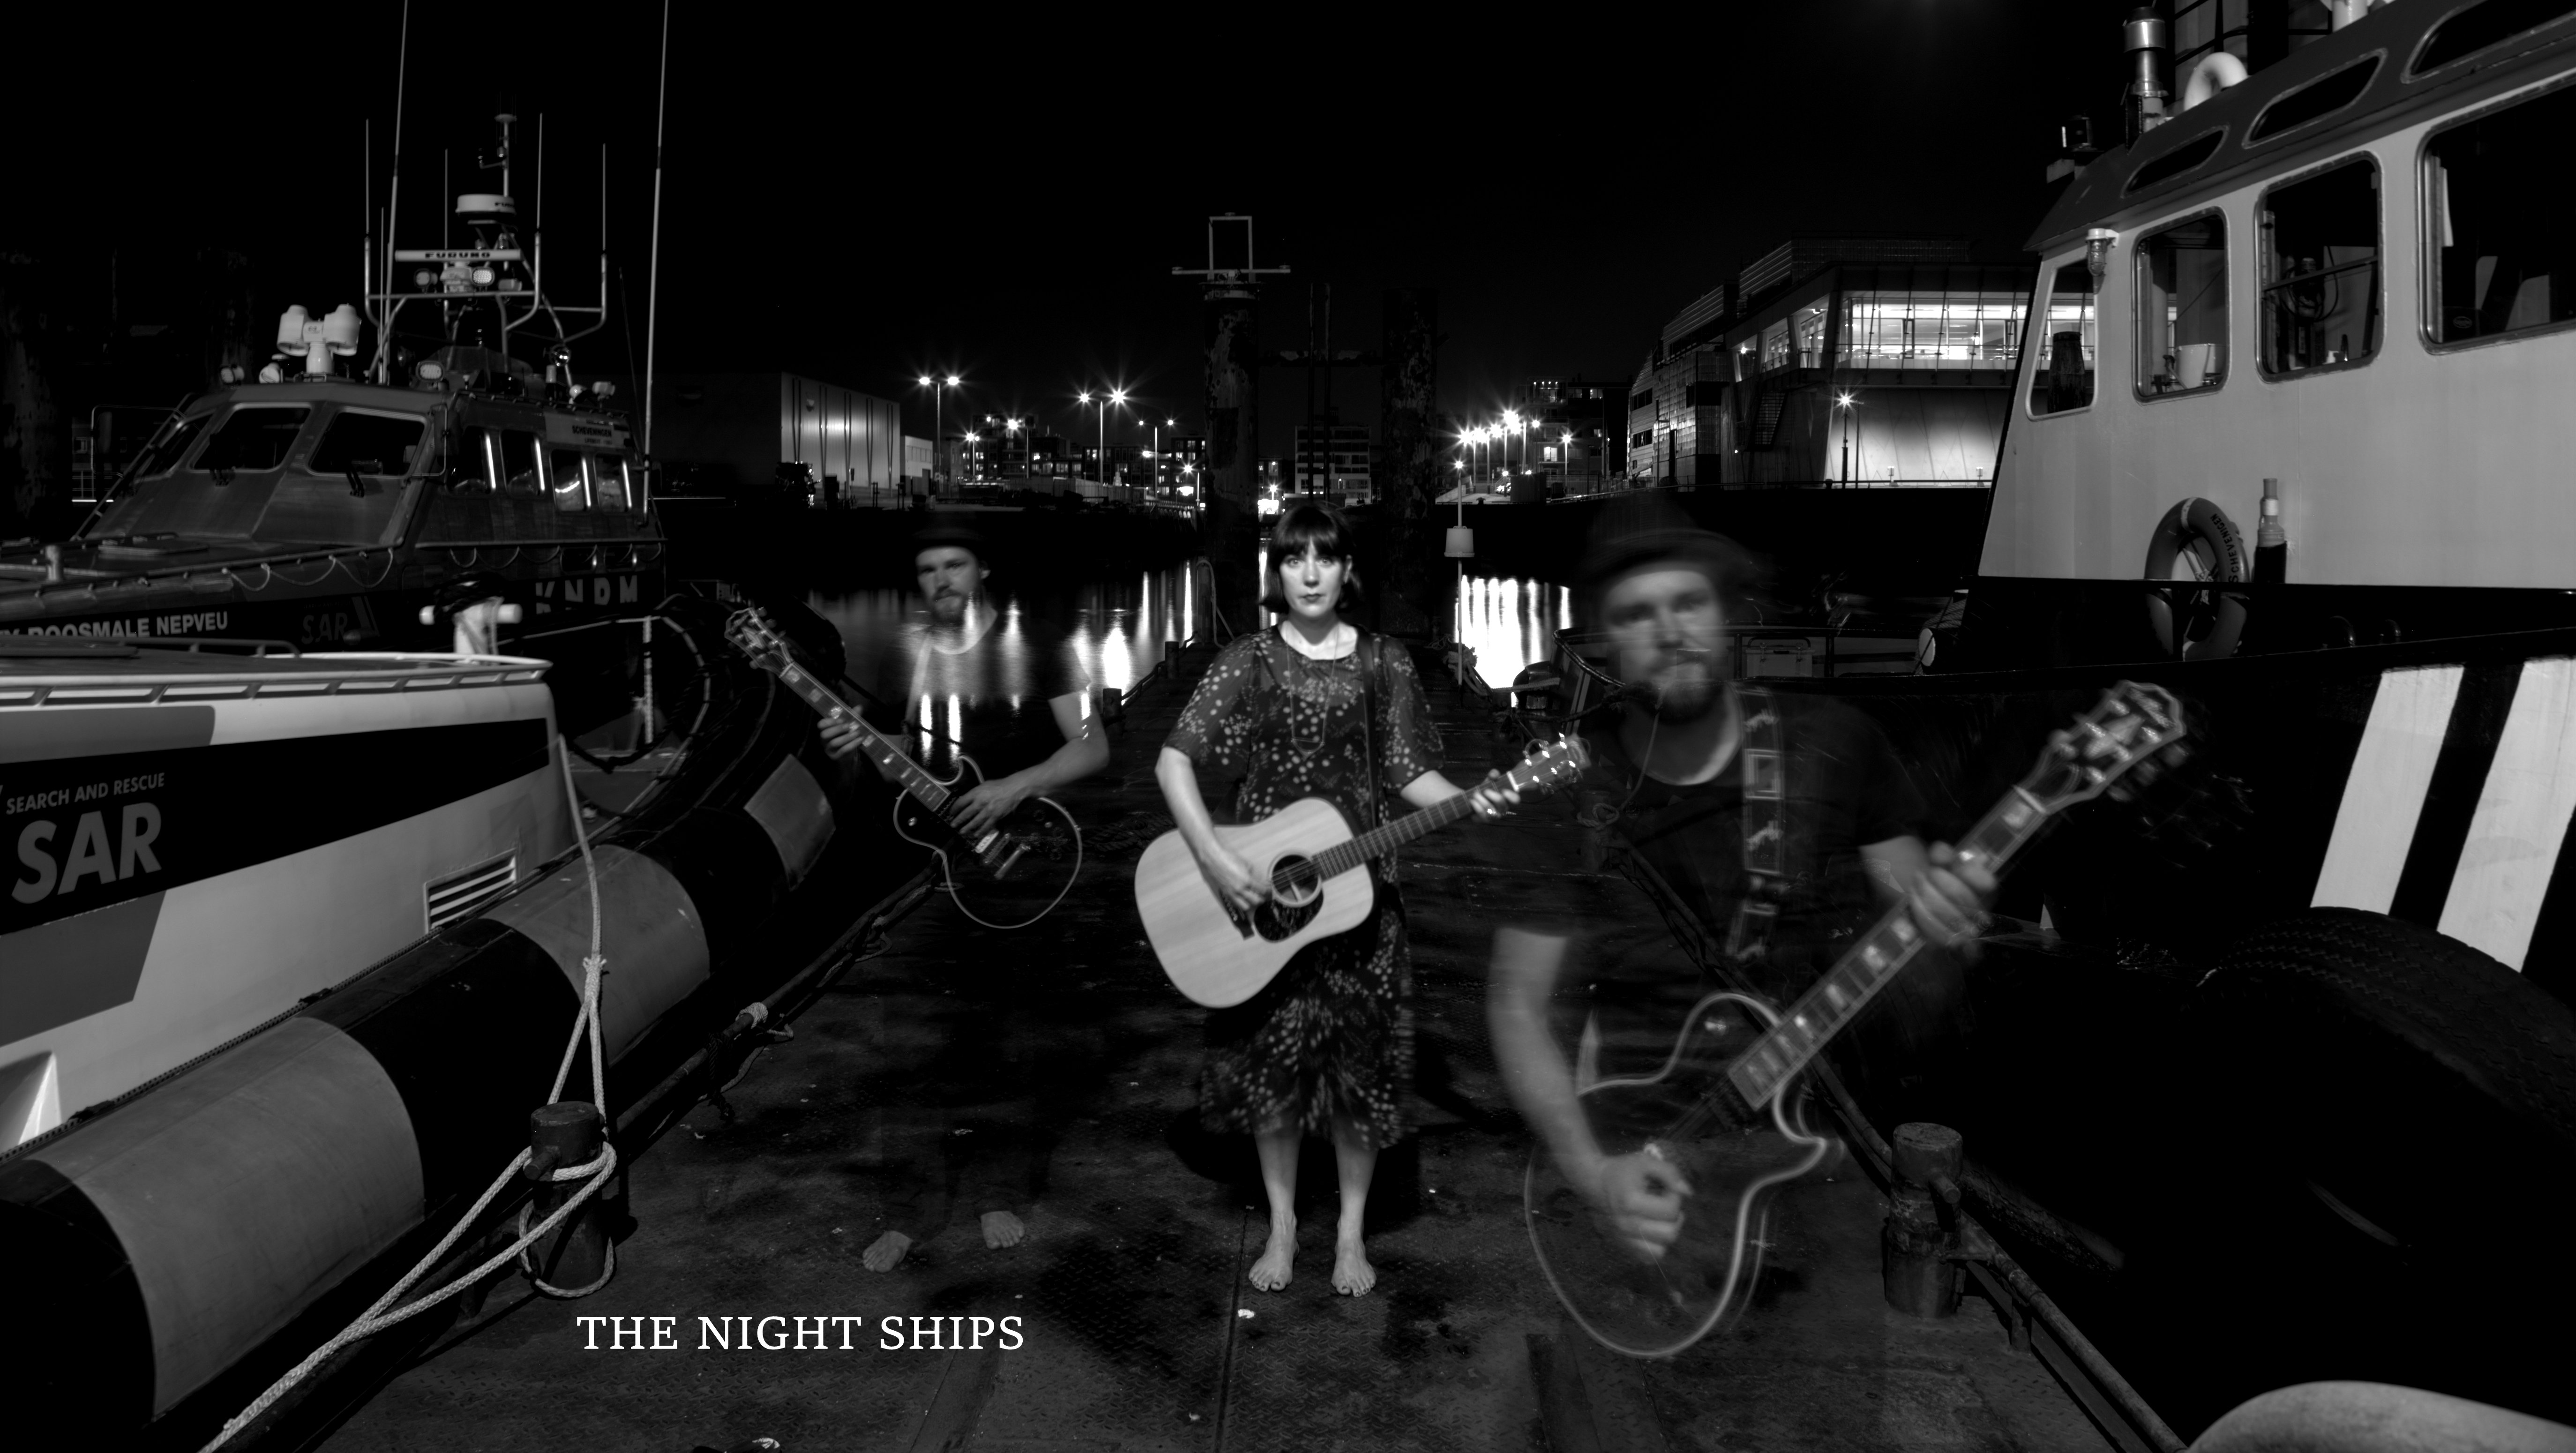 The Night Ships